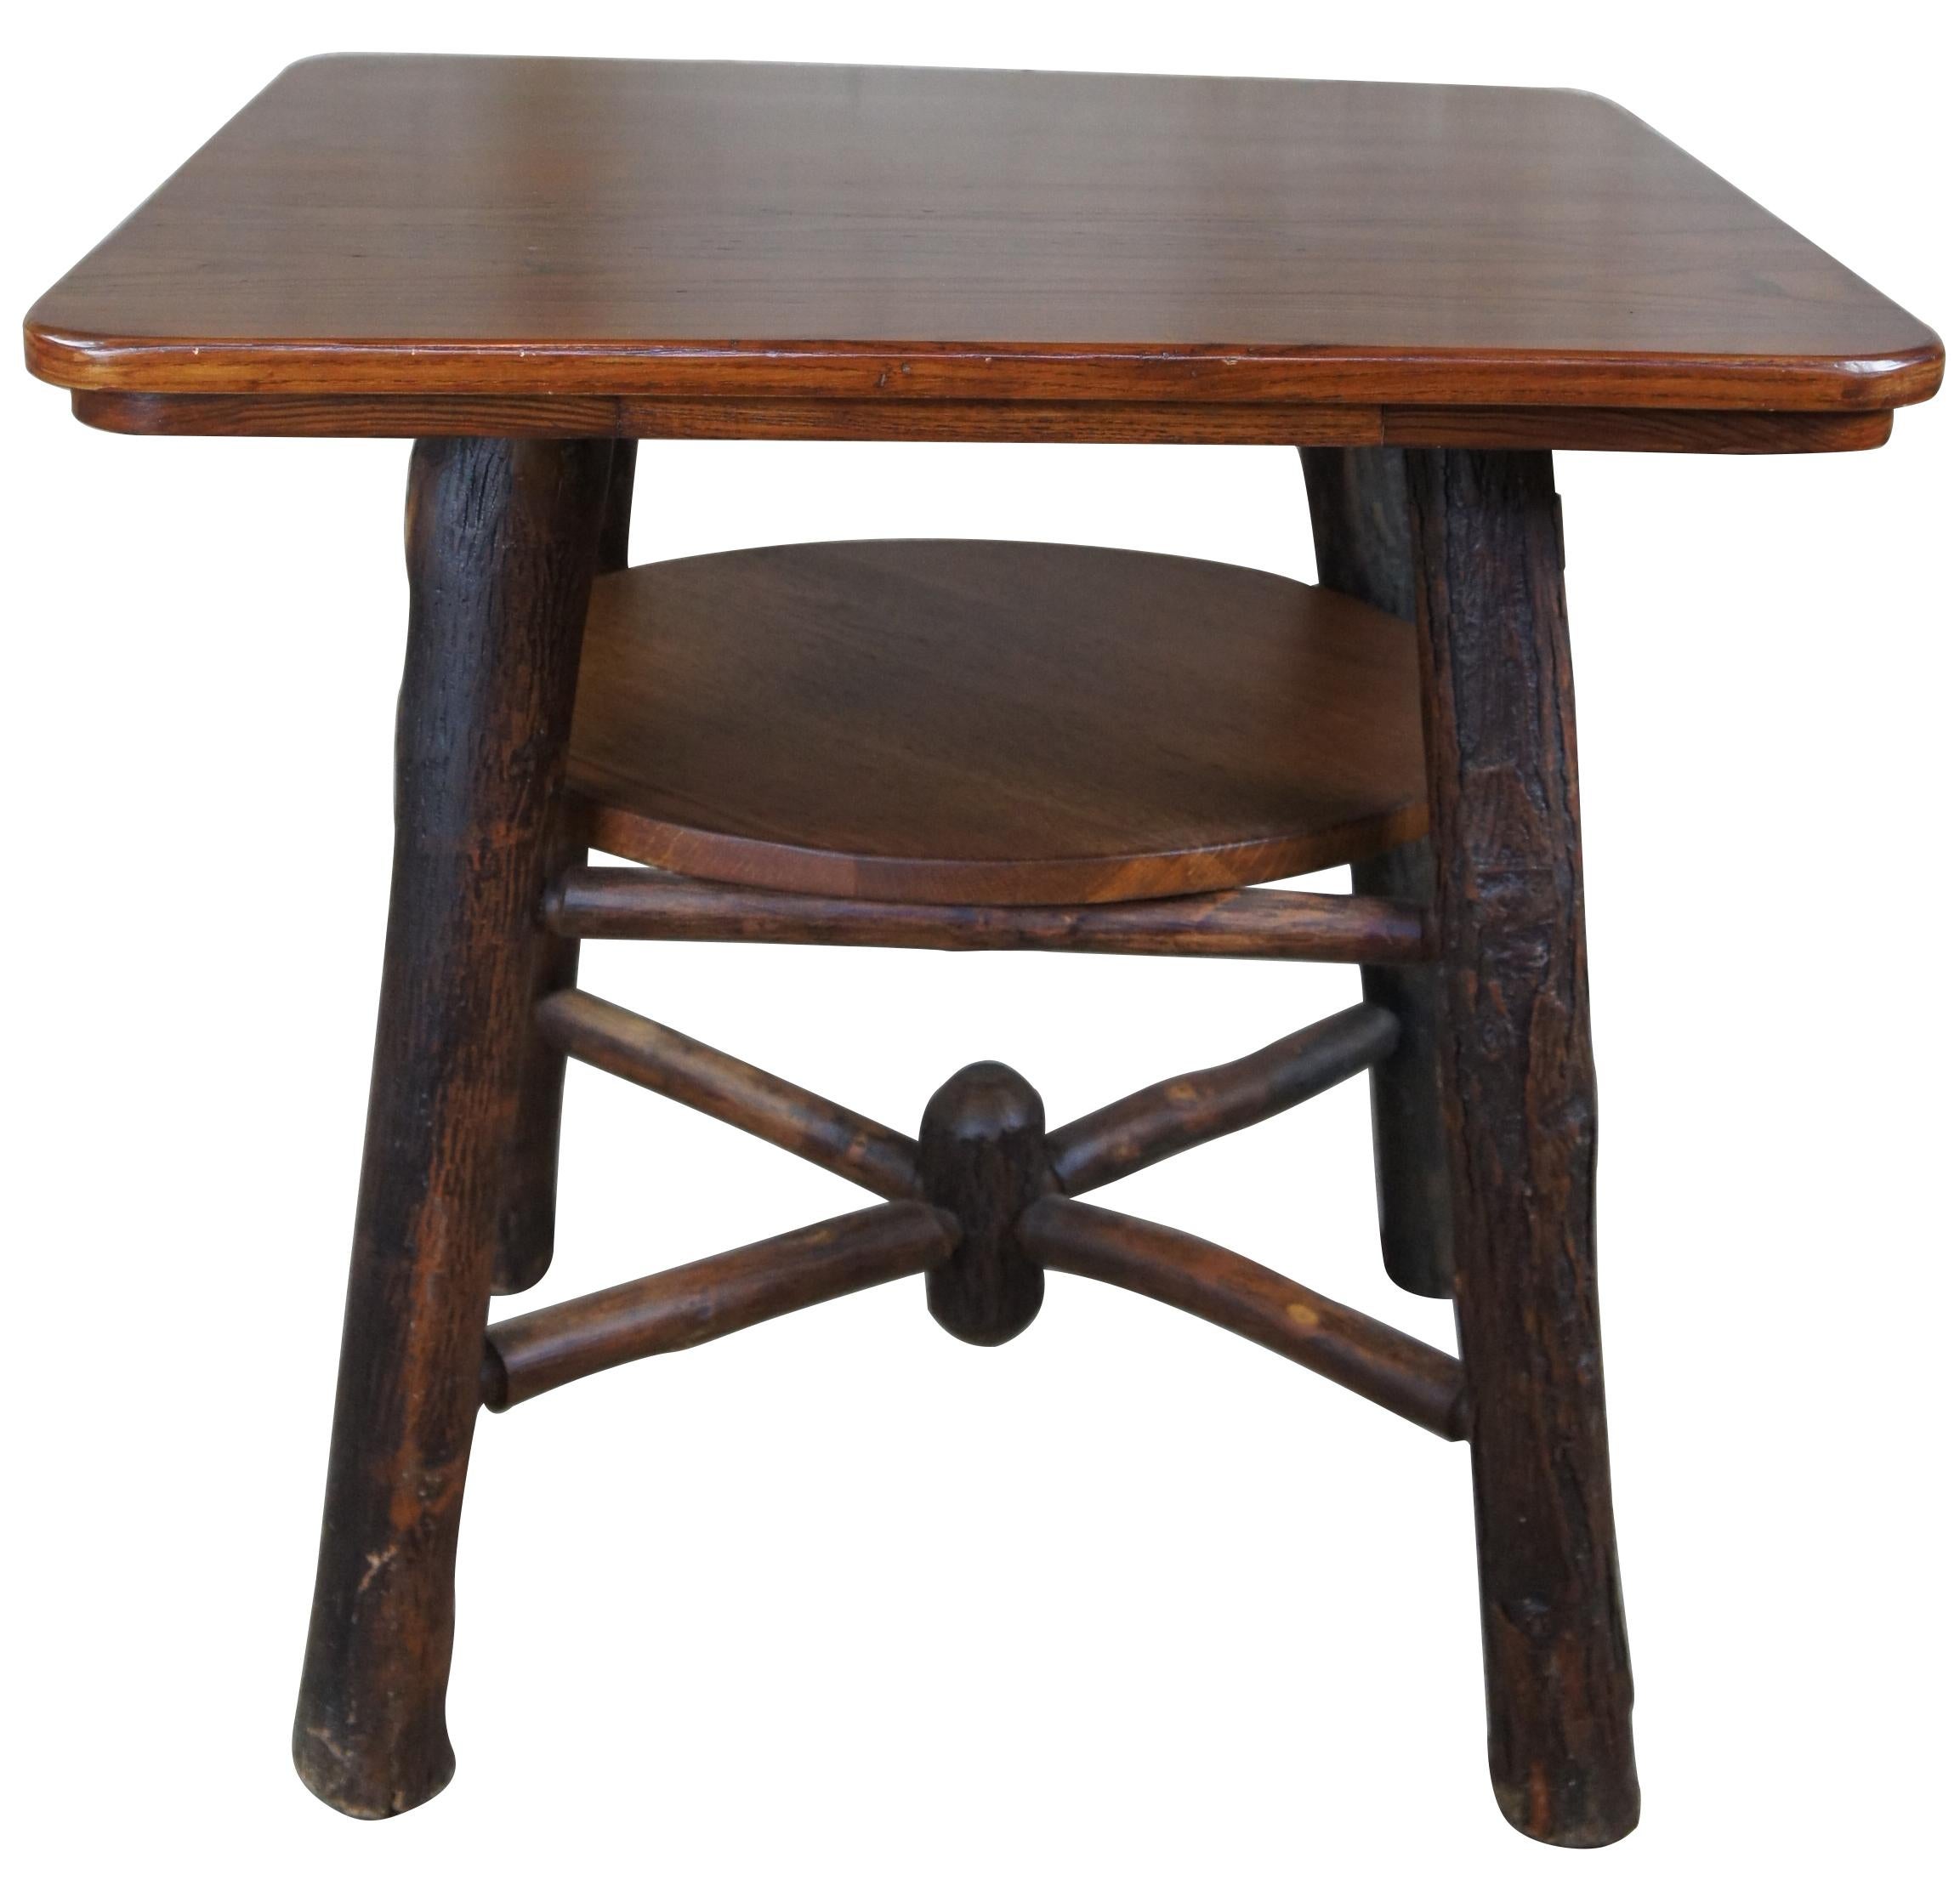 Early 20th Century Rustic Hickory Furniture Company Game Table & Chairs No 103 19 Adirondack Lodge